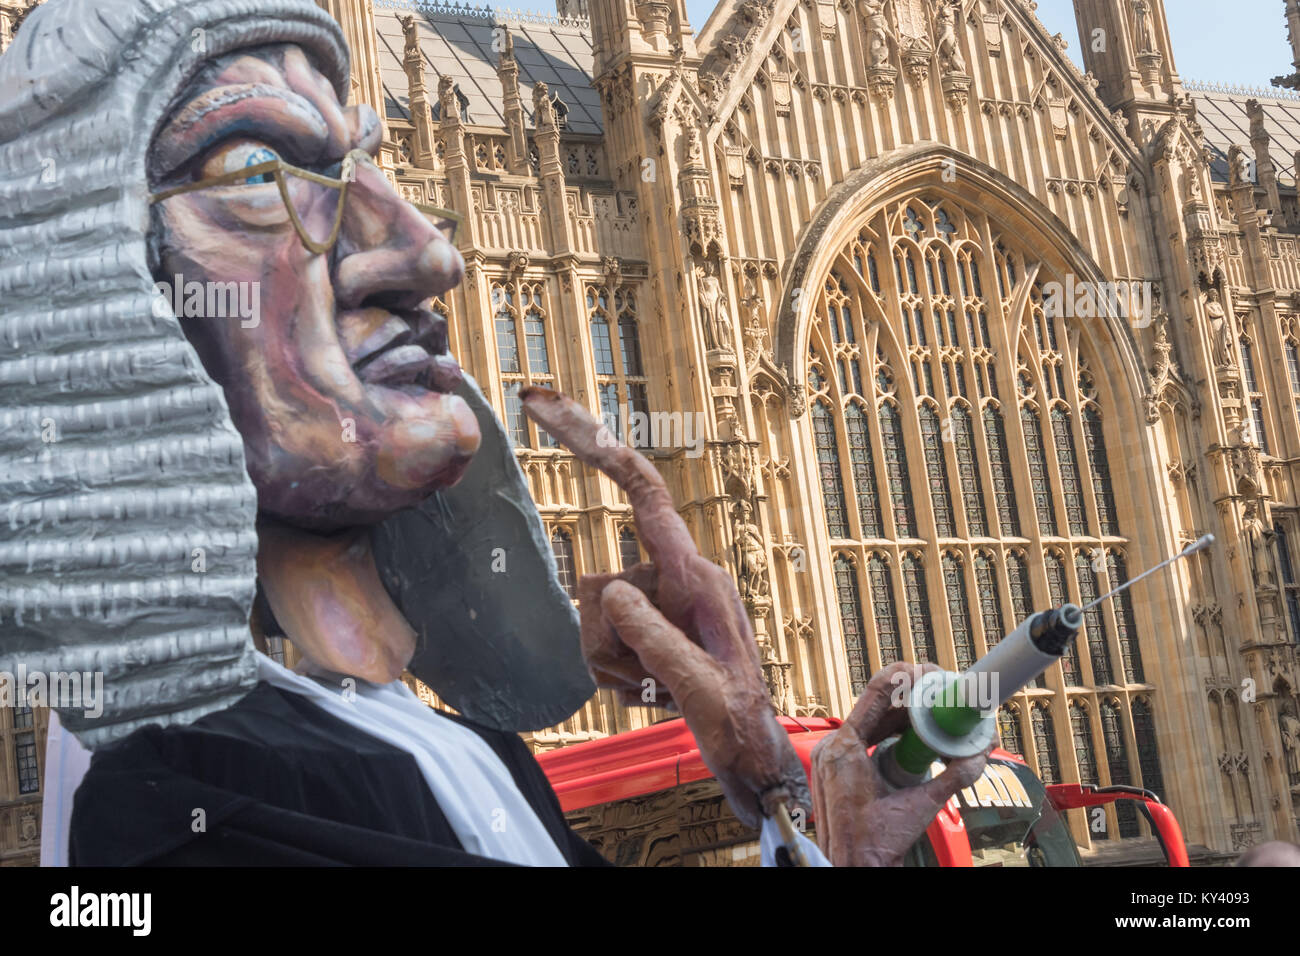 Protesters in Old Palace Yard calling for a NO vote on the Assisted Suicide Bill being debated in Parliament had brought a giant puppet judge with a syringe and the message 'Beware the Slippery Slope'. Stock Photo